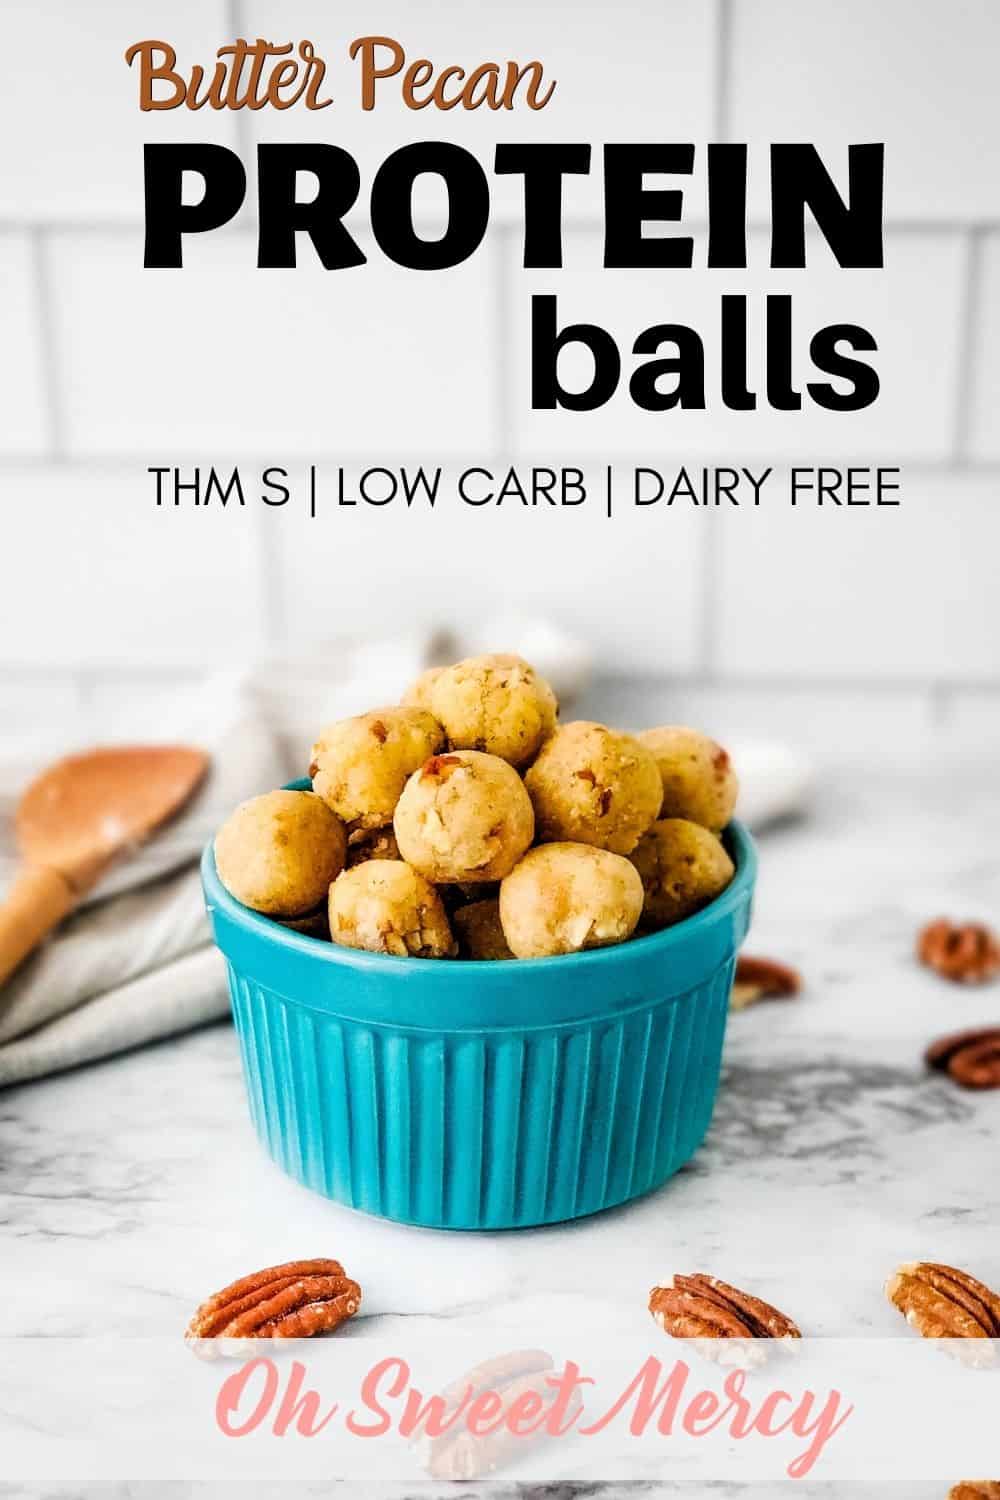 Need a dairy free protein balls recipe? Try my butter pecan version! Easy to make, all you need is a bowl and a spoon! Protein balls are perfect for quick snacks, packing for on the go, or a late night snack. Made with THM Baking Blend but almond flour variations included in recipe. #thm #proteinballs #proteinbites #sugarfree #dairyfree #glutenfree #keto